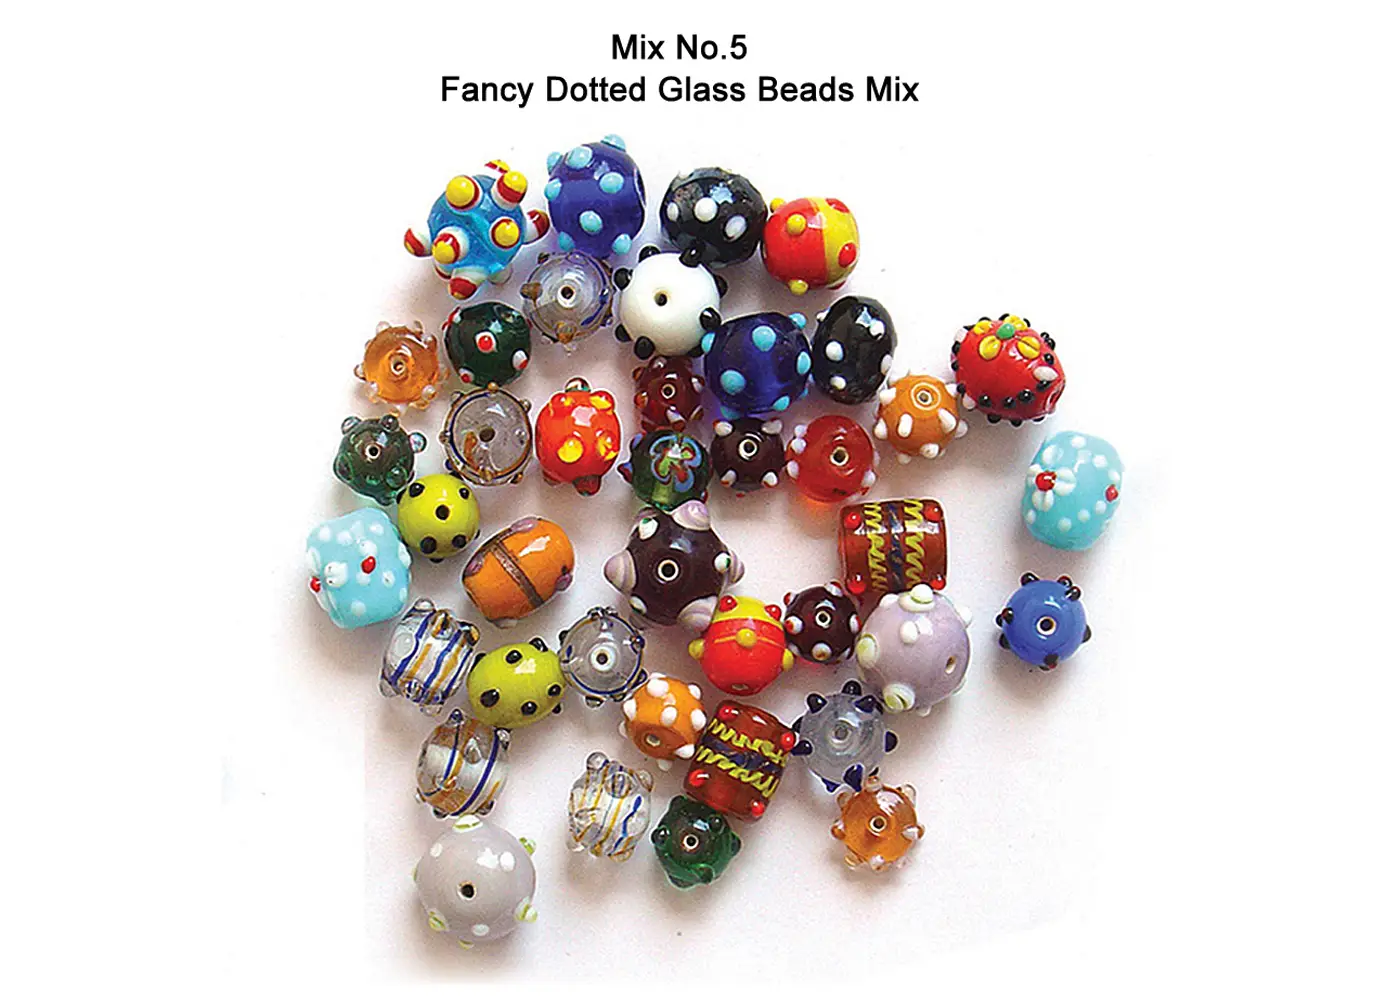 Fancy Dotted Glass Beads